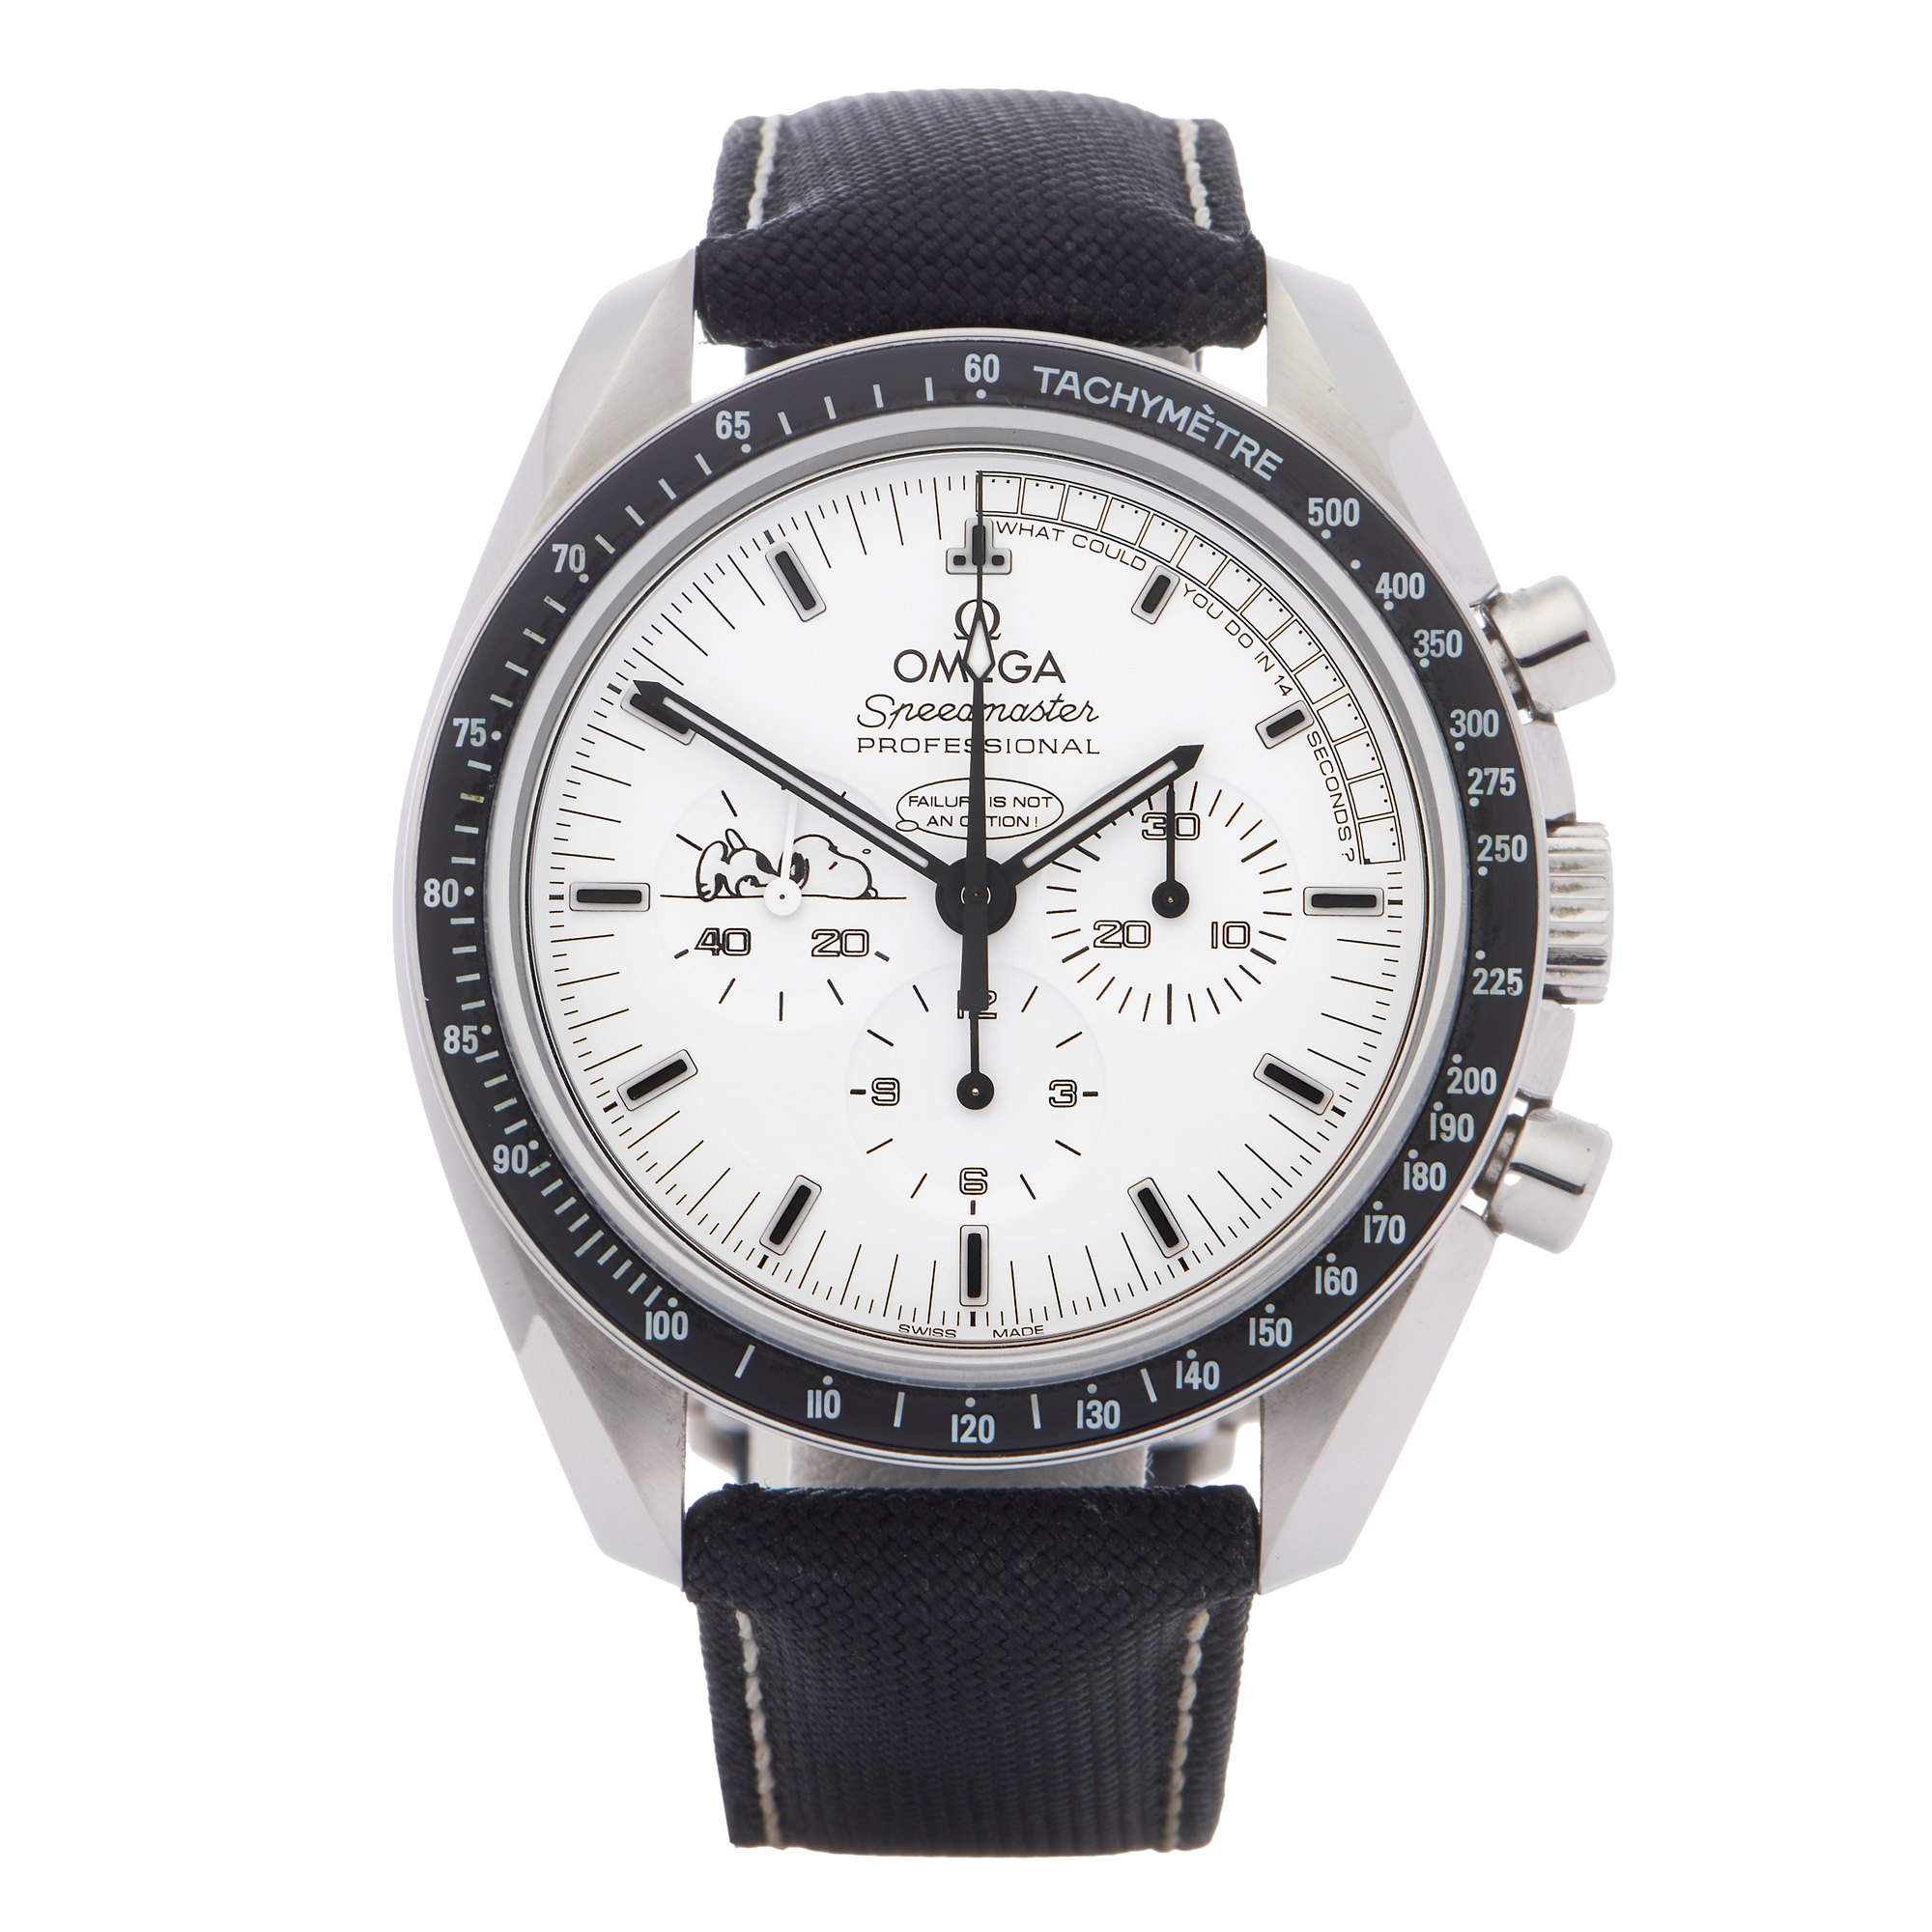 Omega Speedmaster Professional Silver Snoopy Award Apollo XIII 45th Anniversary Stainless Steel 311.32.42.30.04.003